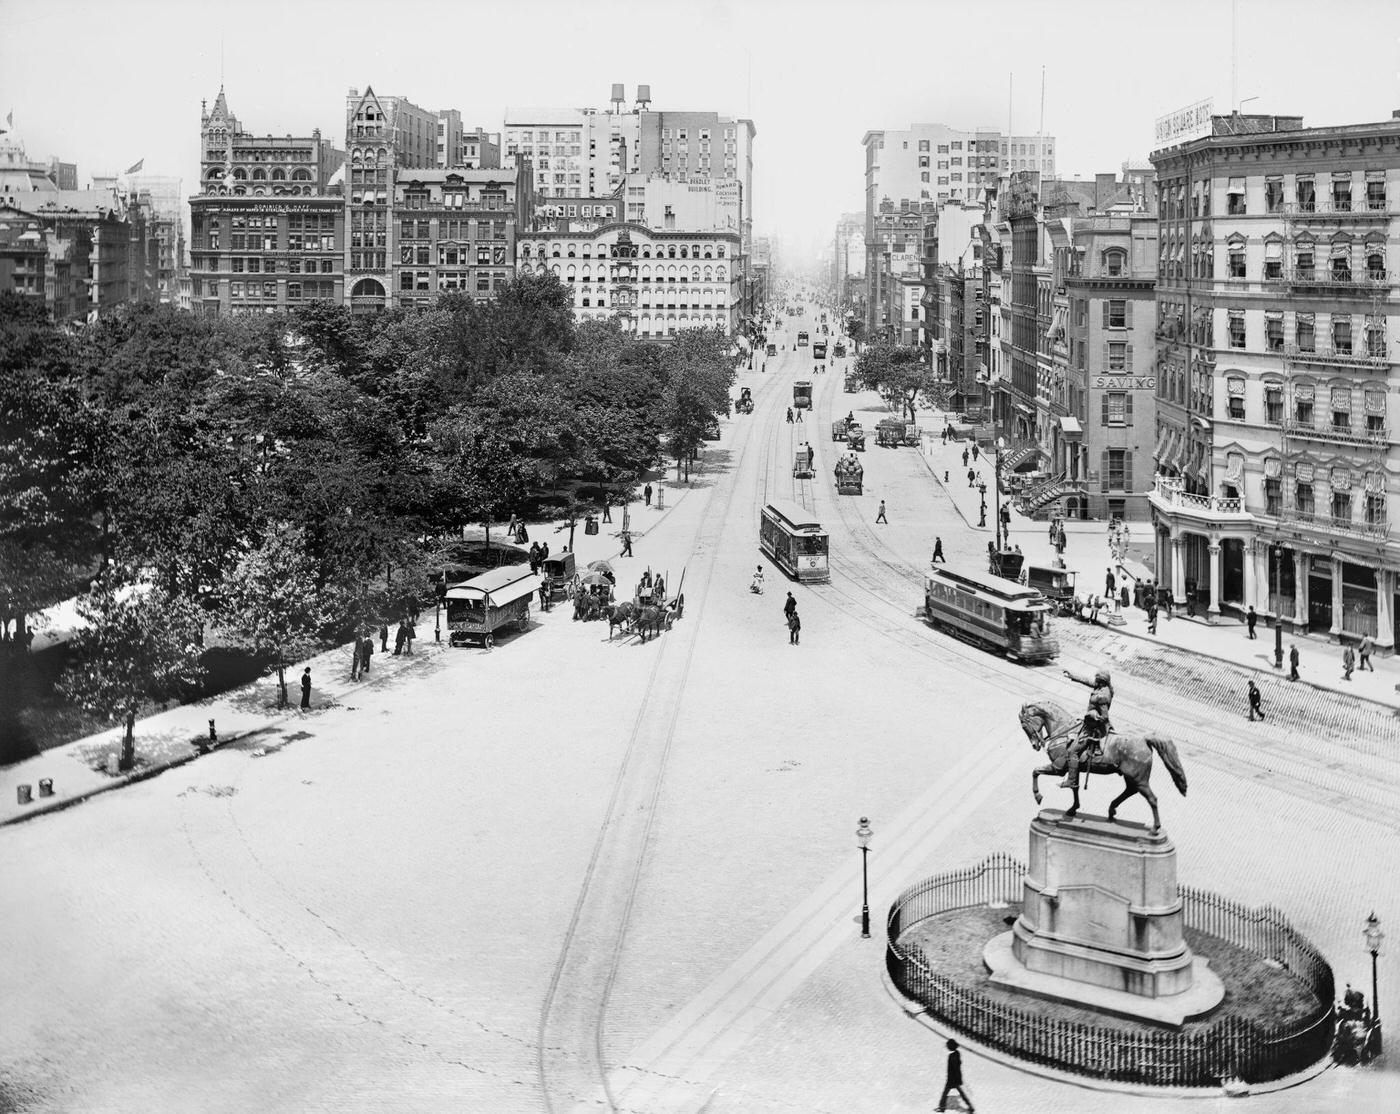 High Angle View Of Union Square Looking North Toward Union Square West And Park Avenue South, New York City, 1900